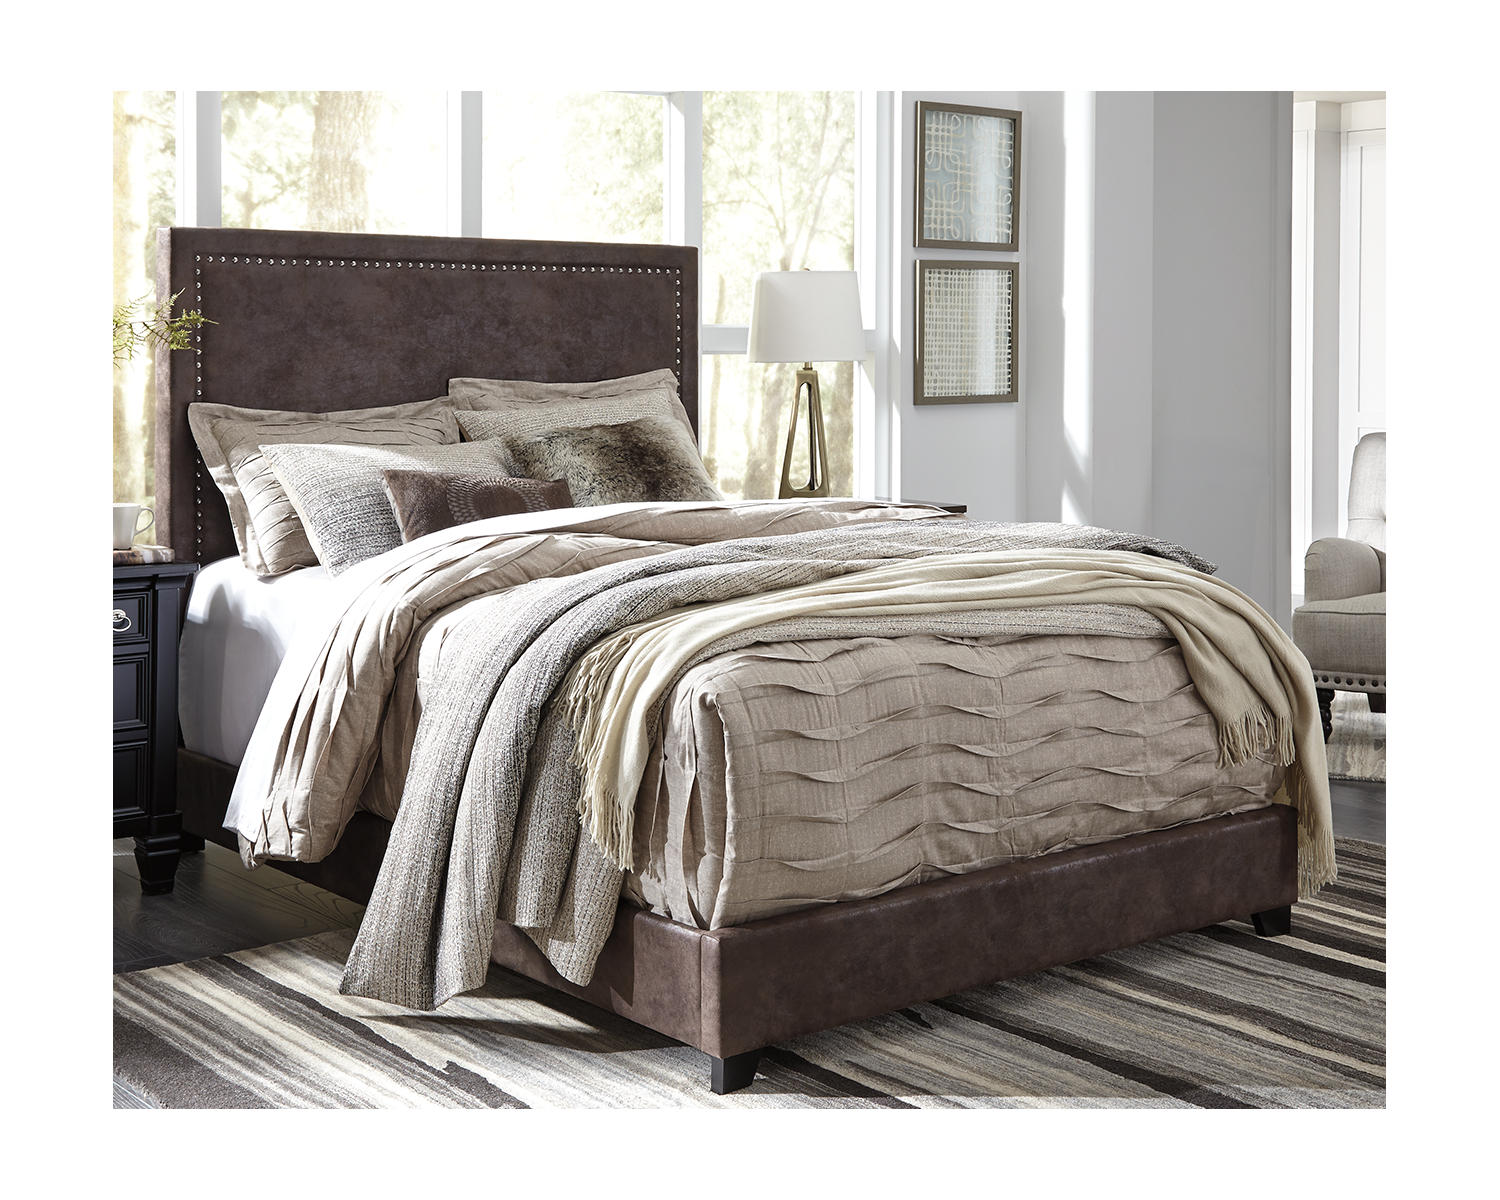 Signature Design by Ashley Dolante Contemporary Faux Leather Upholstered Platform Bed, Queen, Brown - image 2 of 8